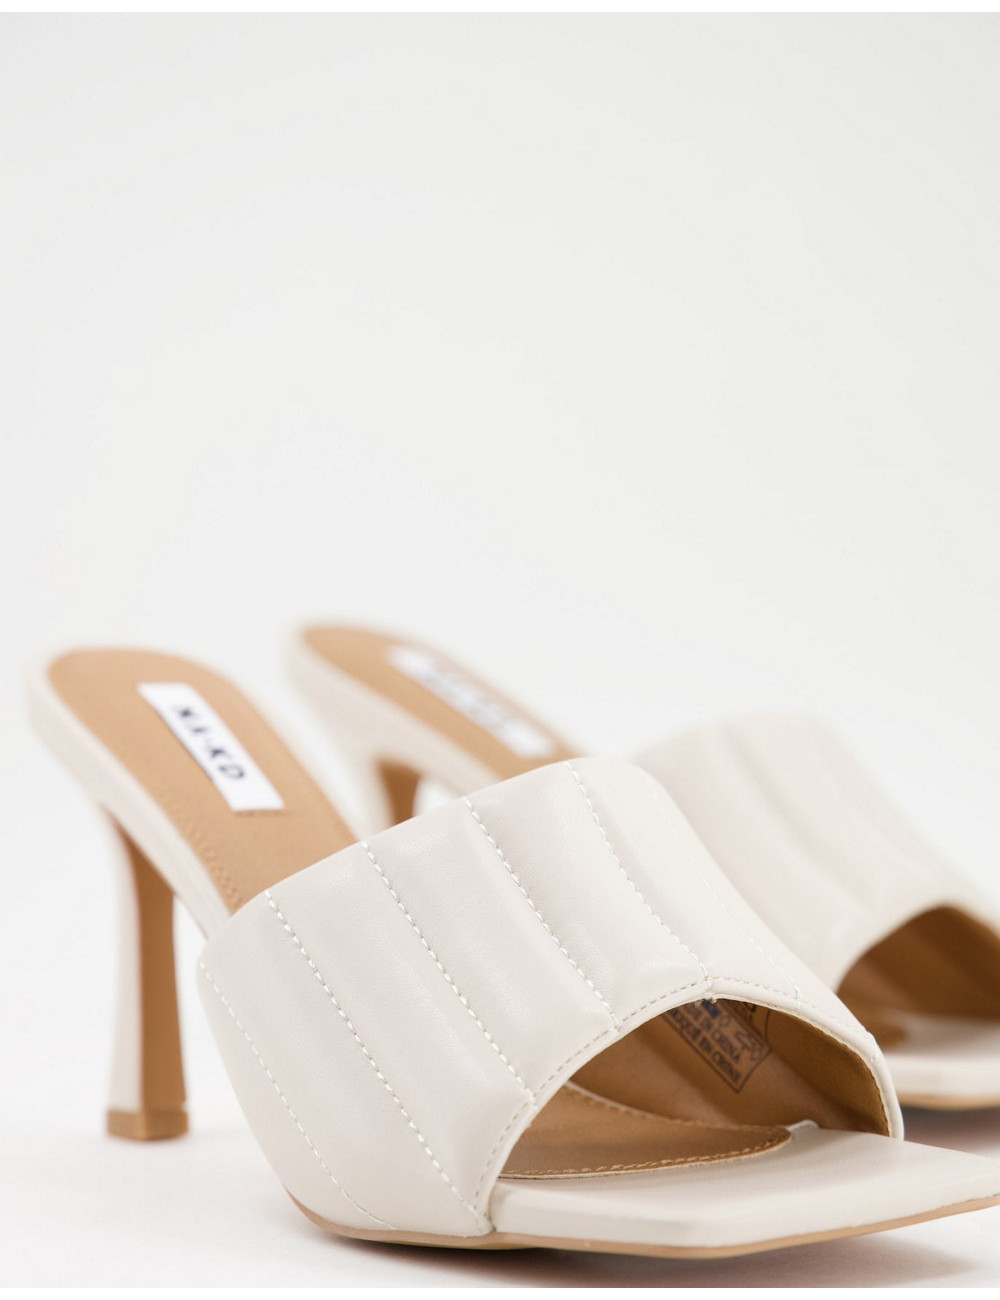 NA-KD quilted heels in cream